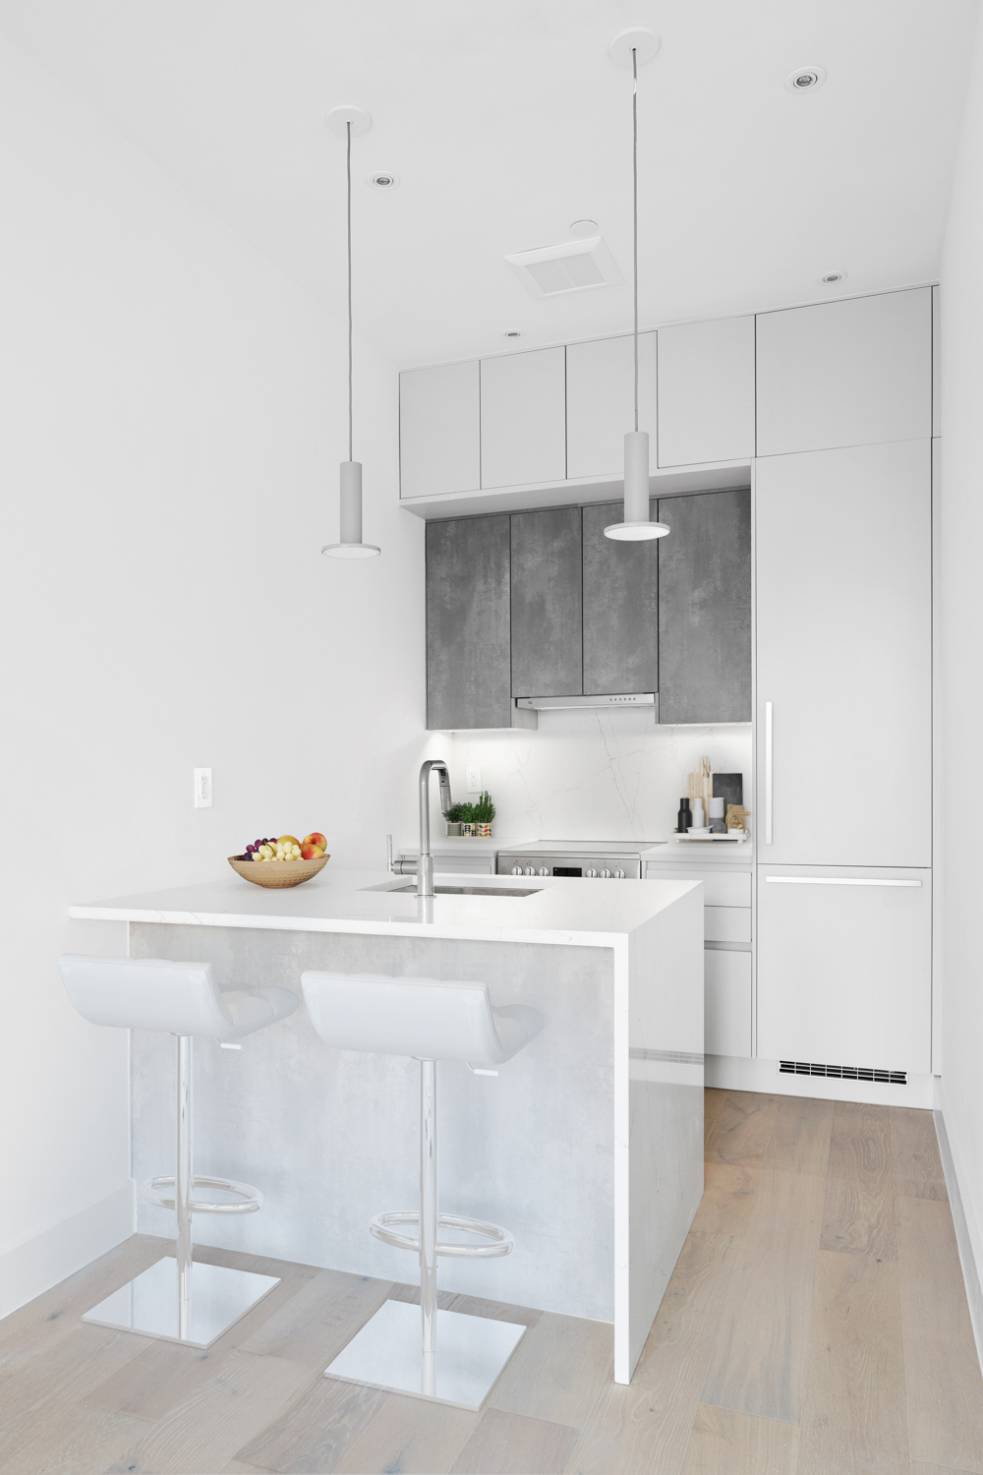 682 Willoughby Avenue is a brand new residential condo development in the heart of Bed Stuy !